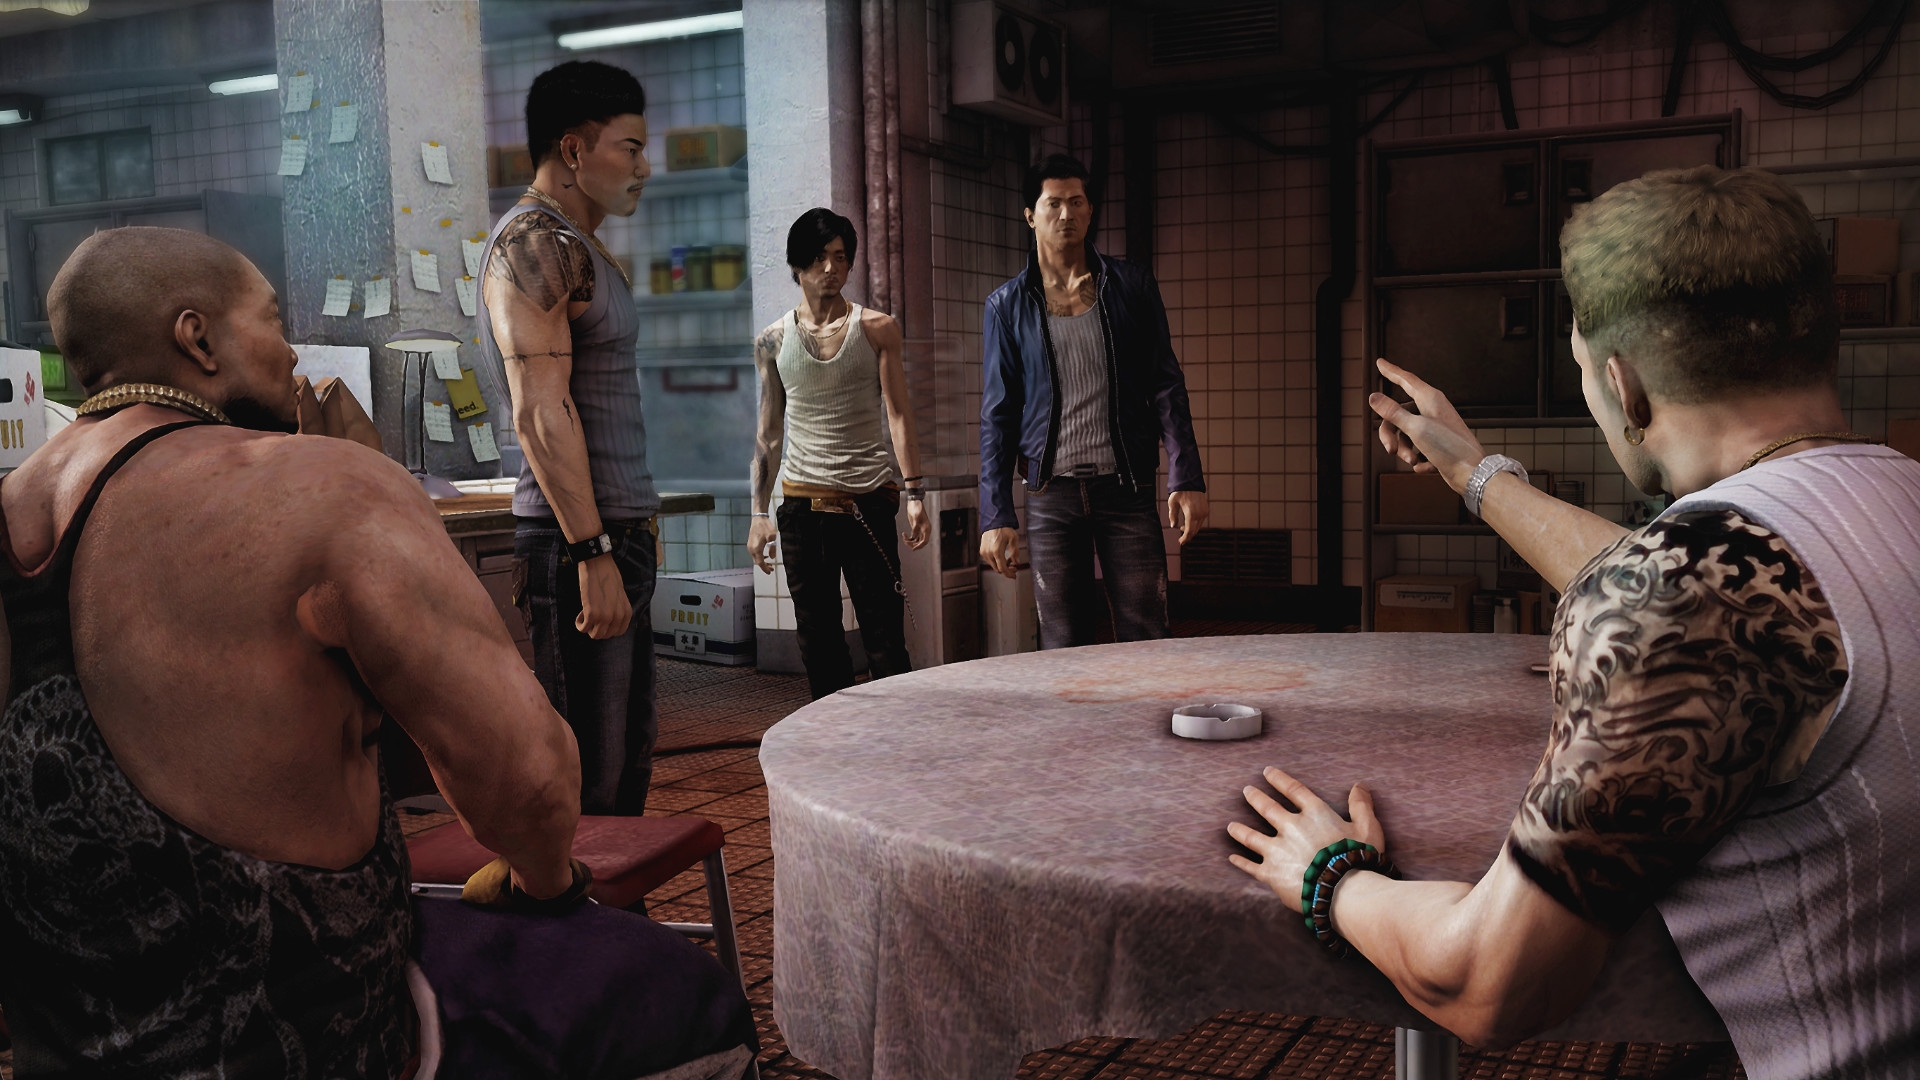 As Sleeping Dogs turns ten, we ask: where the heck is the sequel?